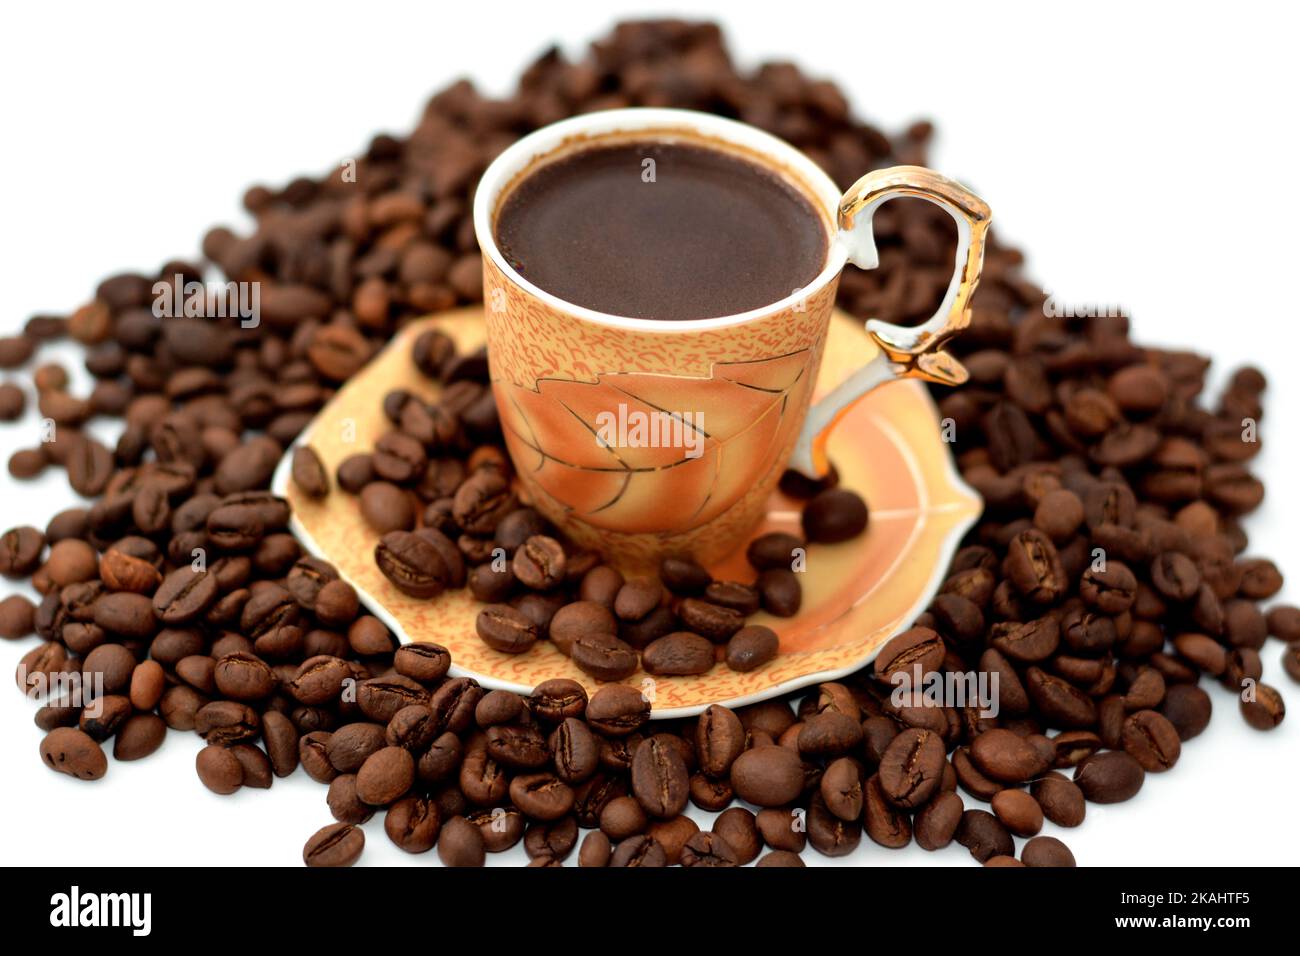 A cup of Turkish coffee with coffee beans, seeds of the Coffea plant and the source for coffee. It is the pip inside the red or purple fruit often ref Stock Photo